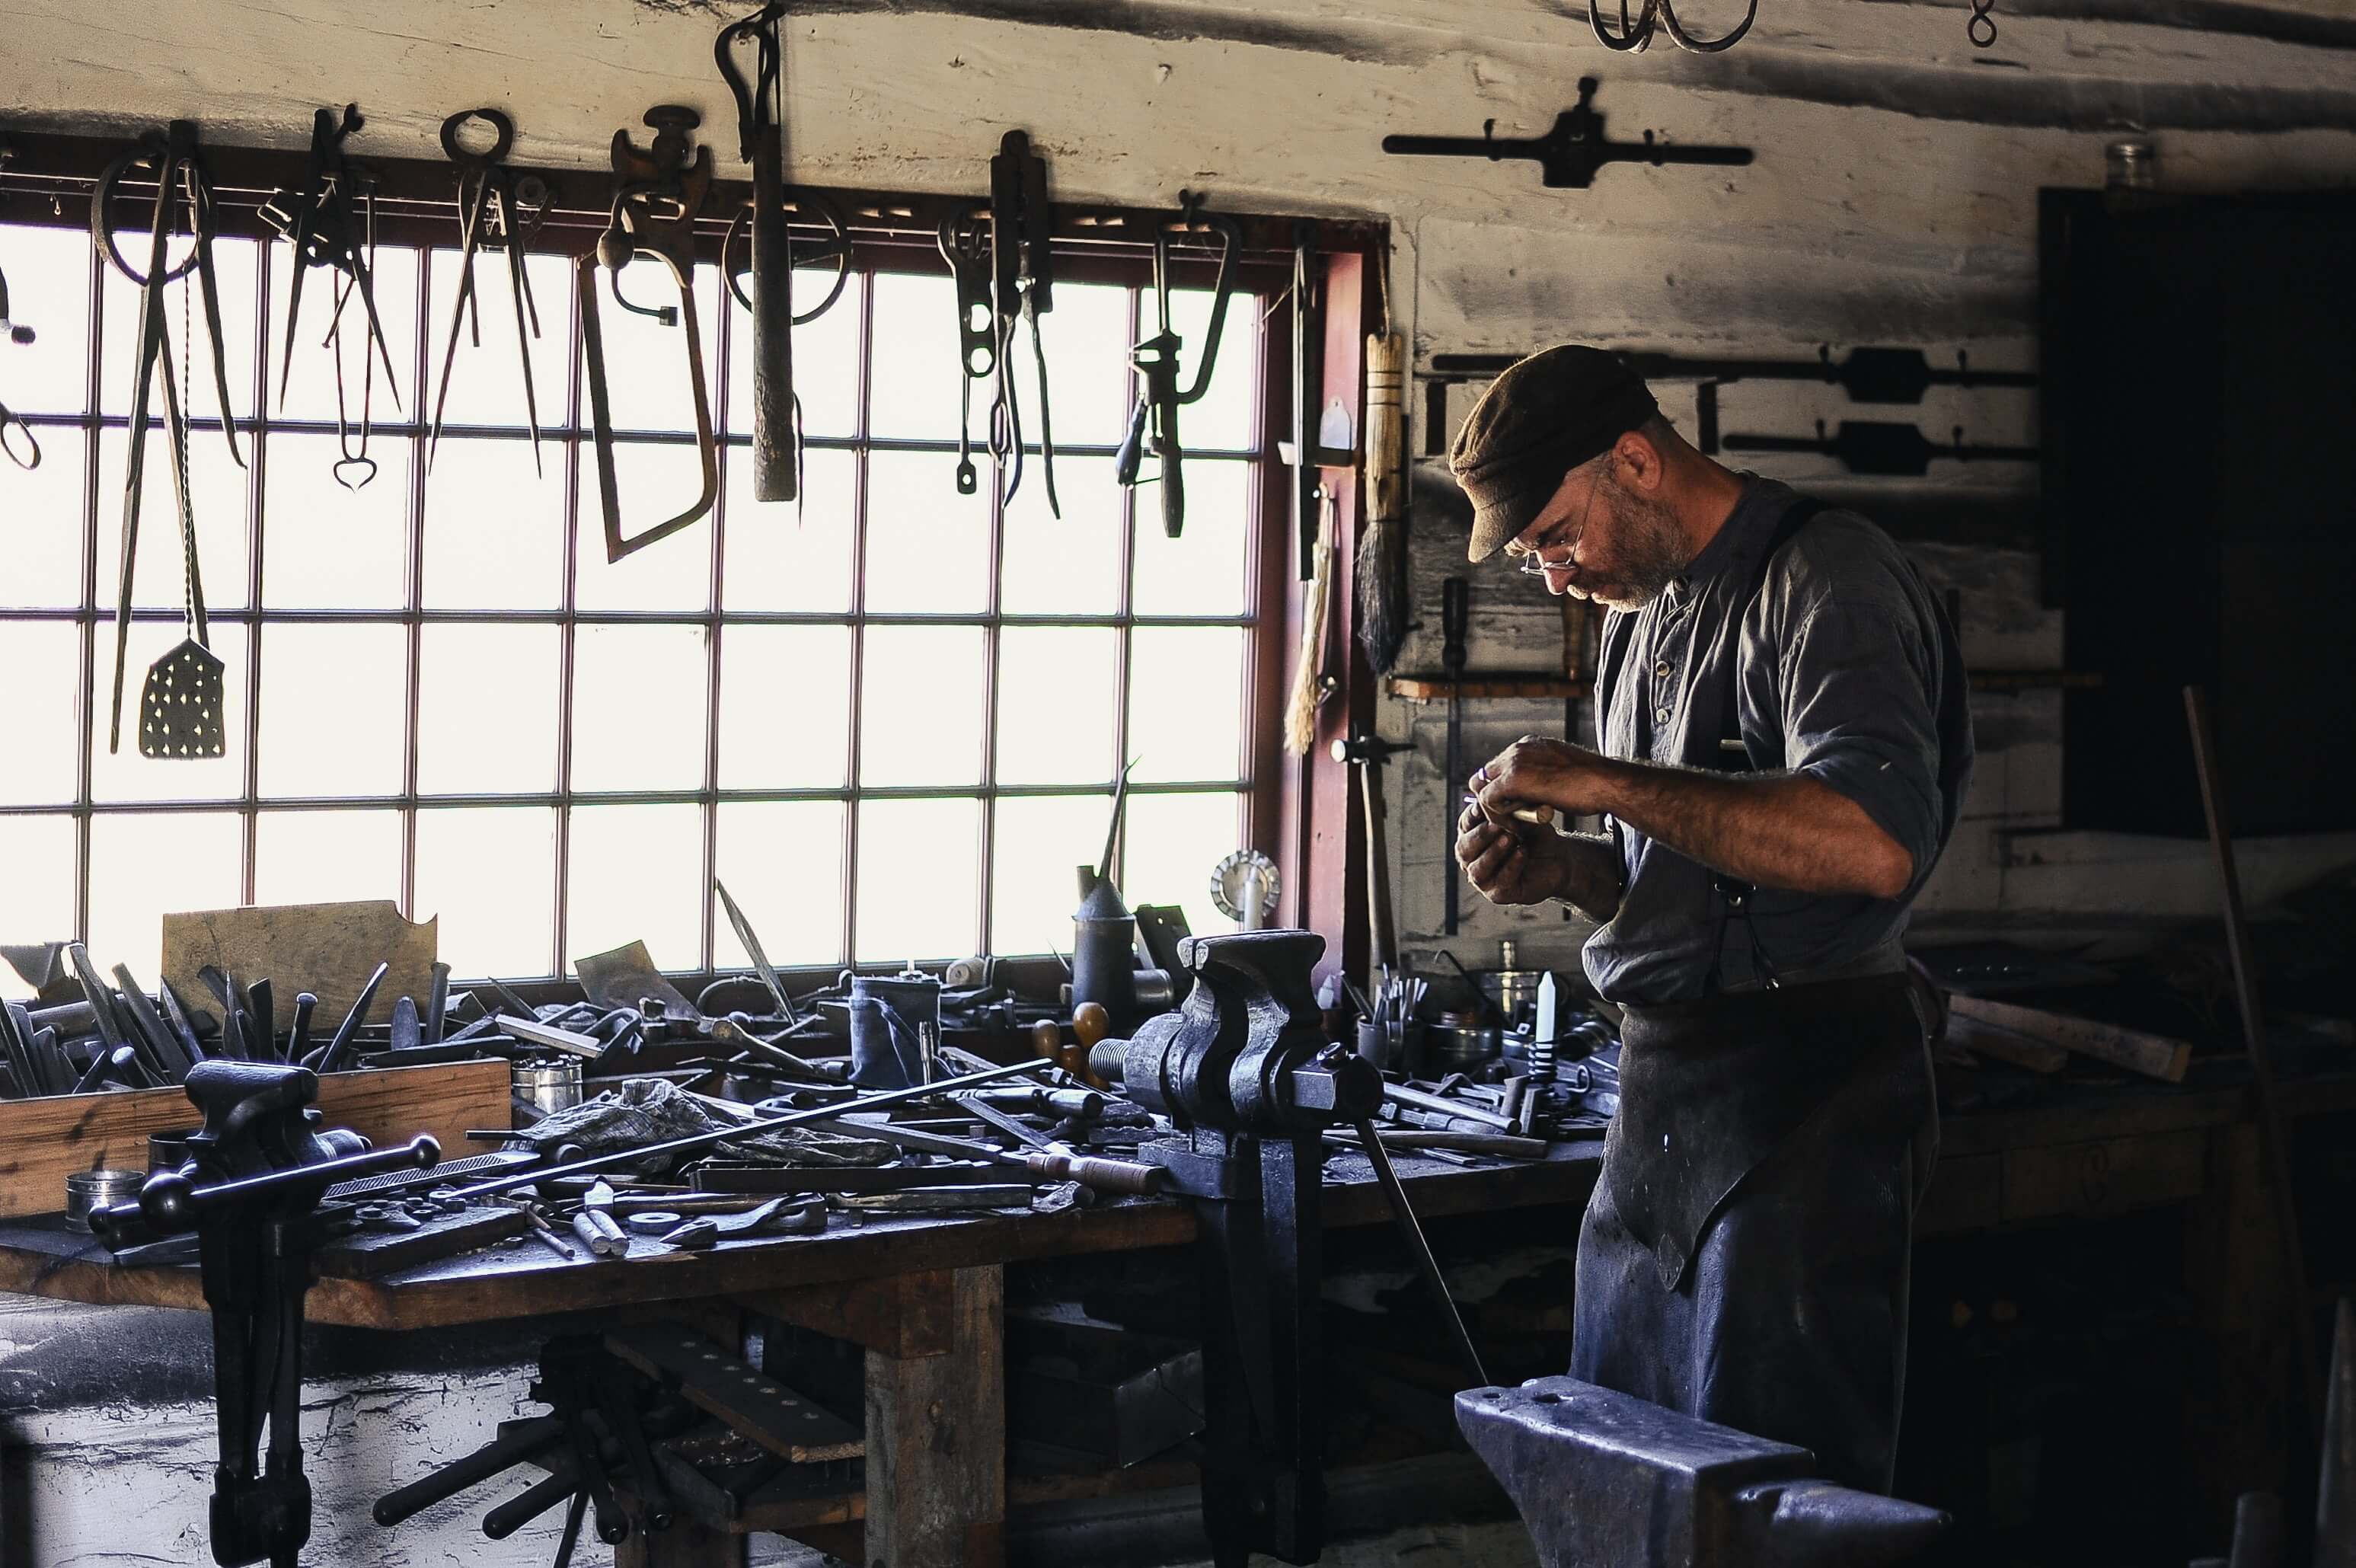 A metalsmith working in a room full of metal objects